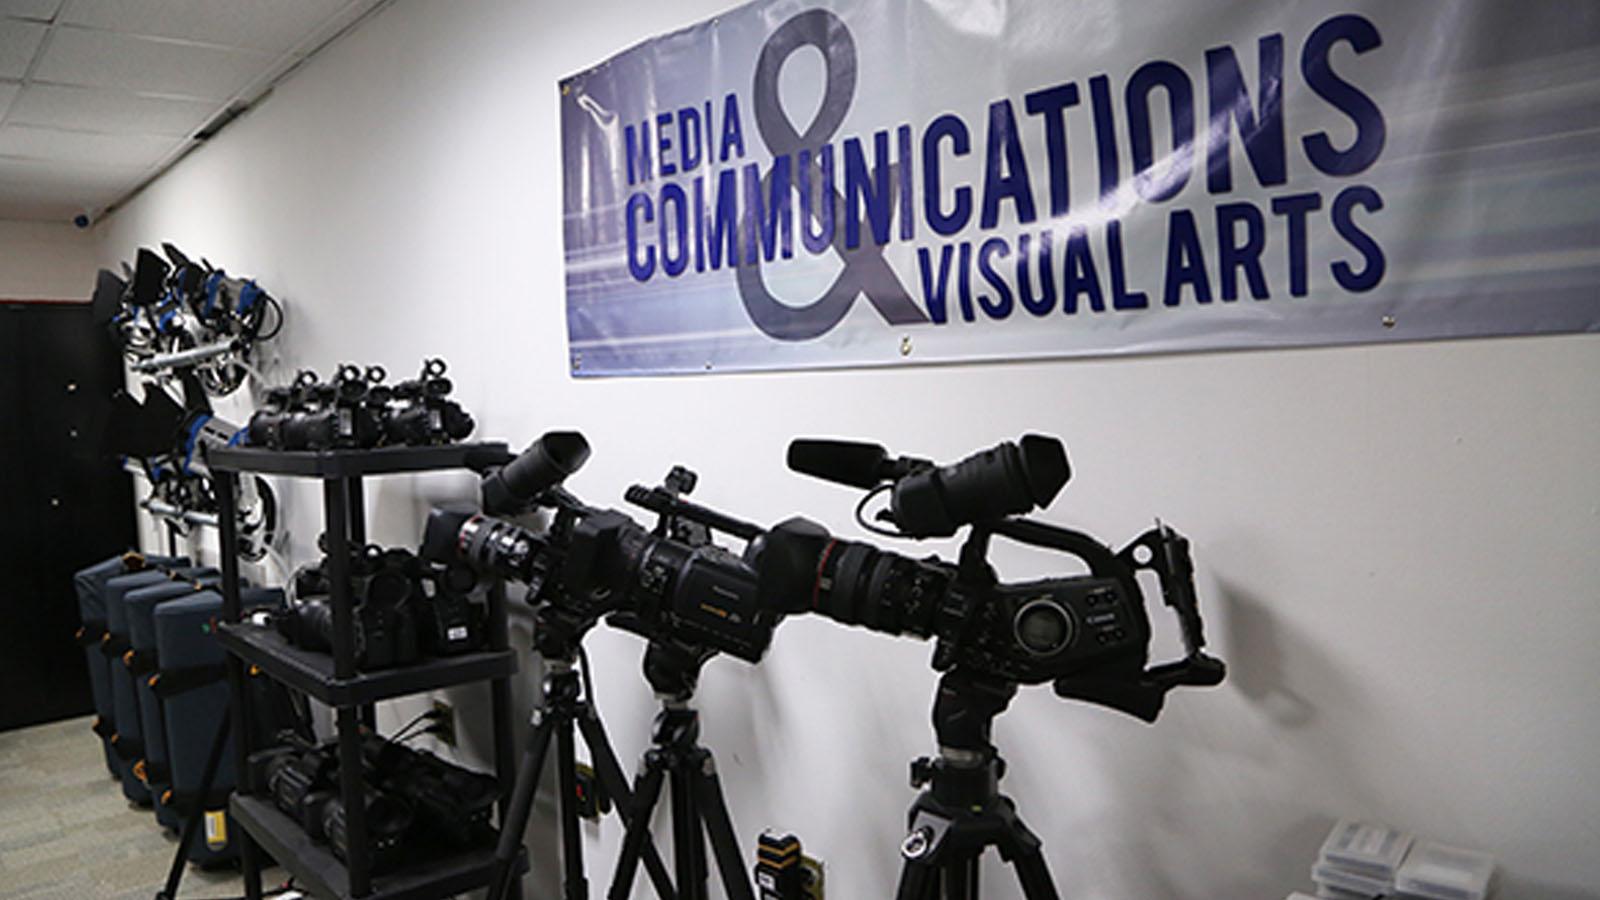 Camera equipment and tripod storage with a Media, Communications, and Visual Arts department banner